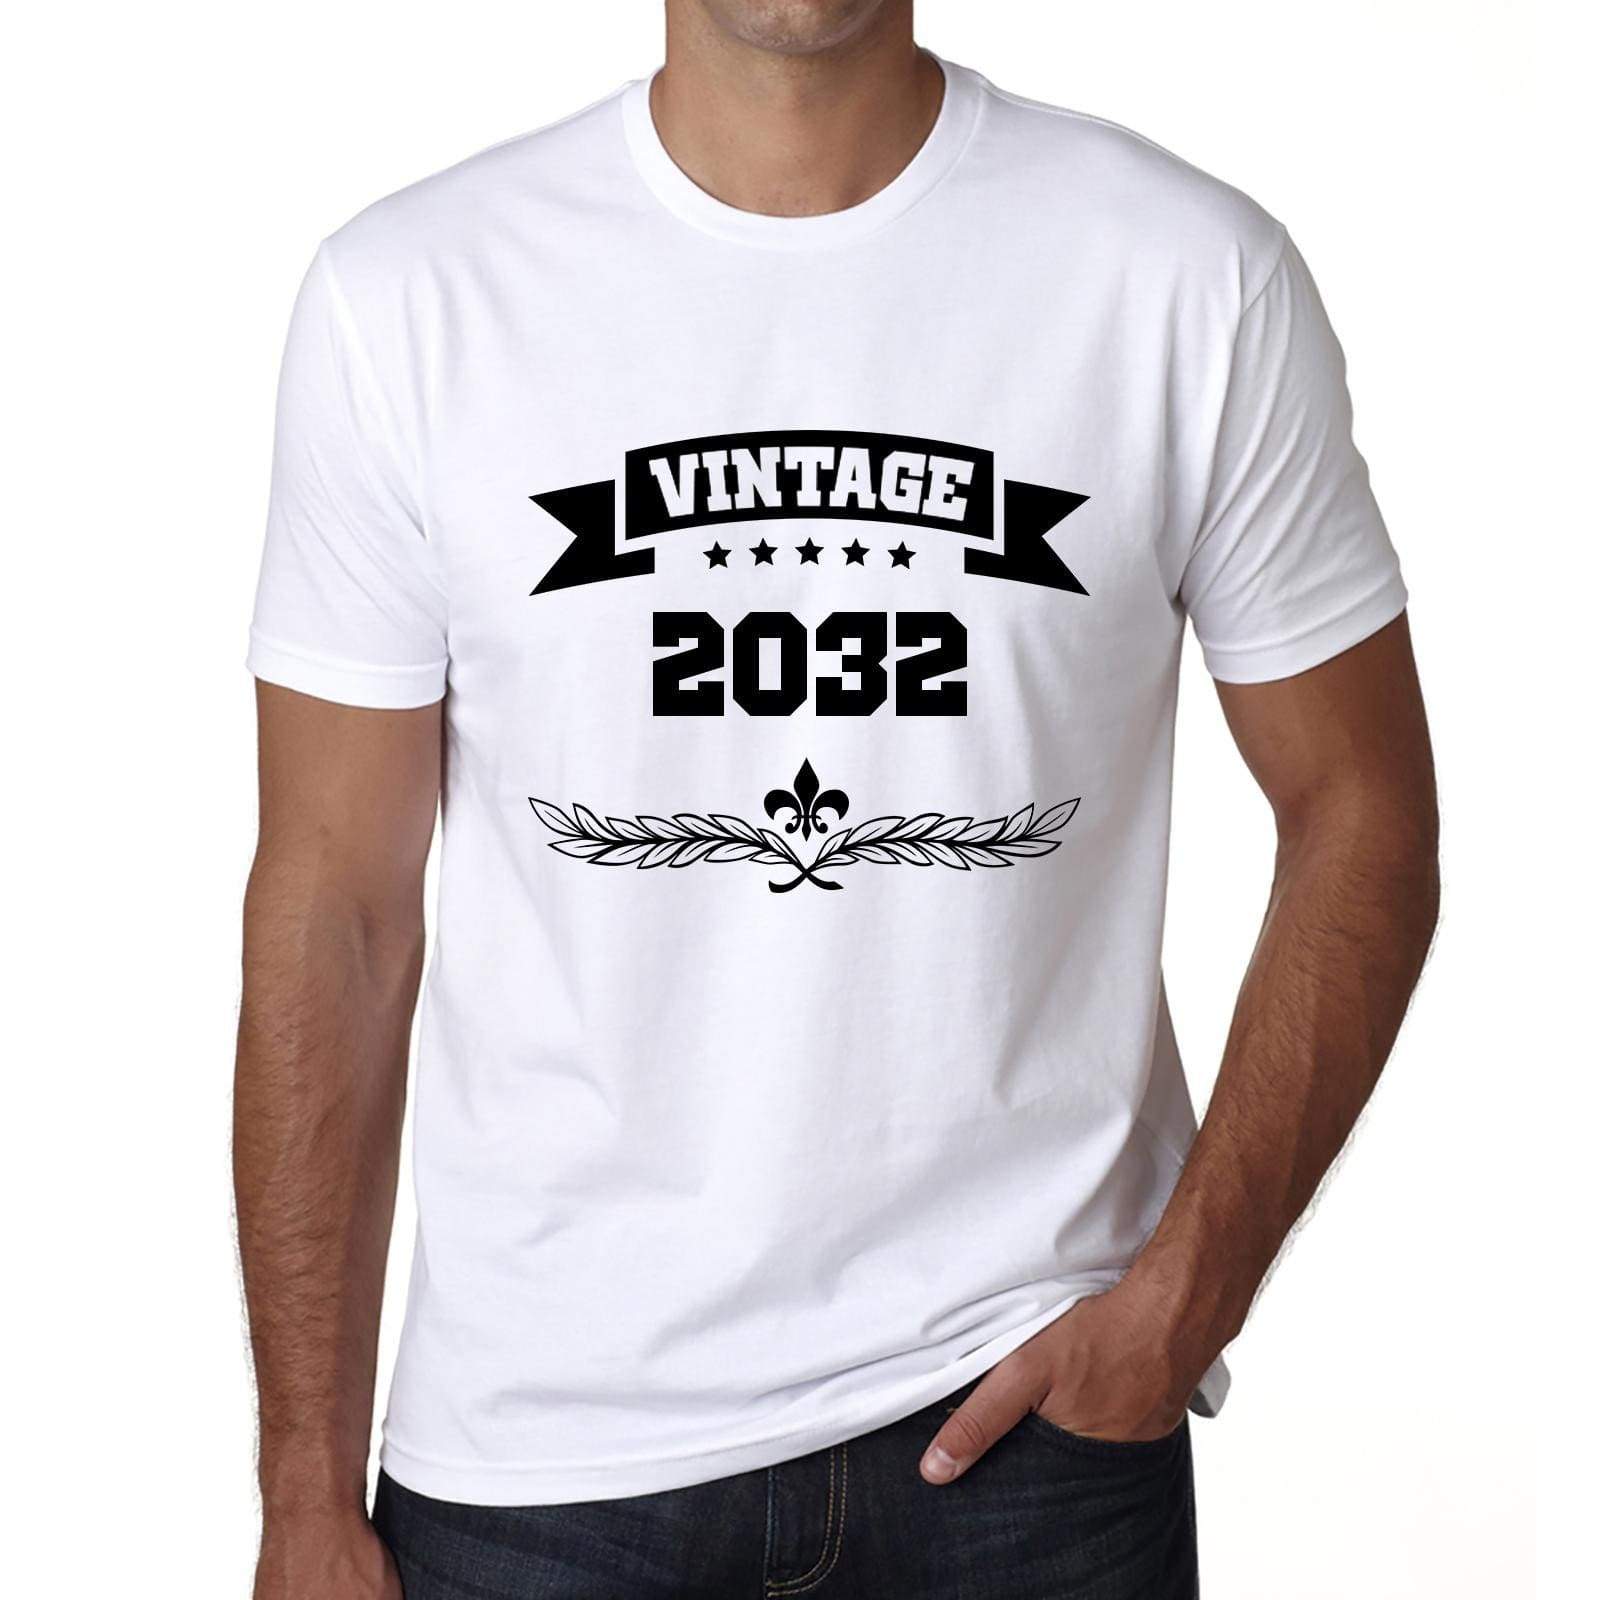 2032 Vintage Year White Mens Short Sleeve Round Neck T-Shirt 00096 - White / S - Casual